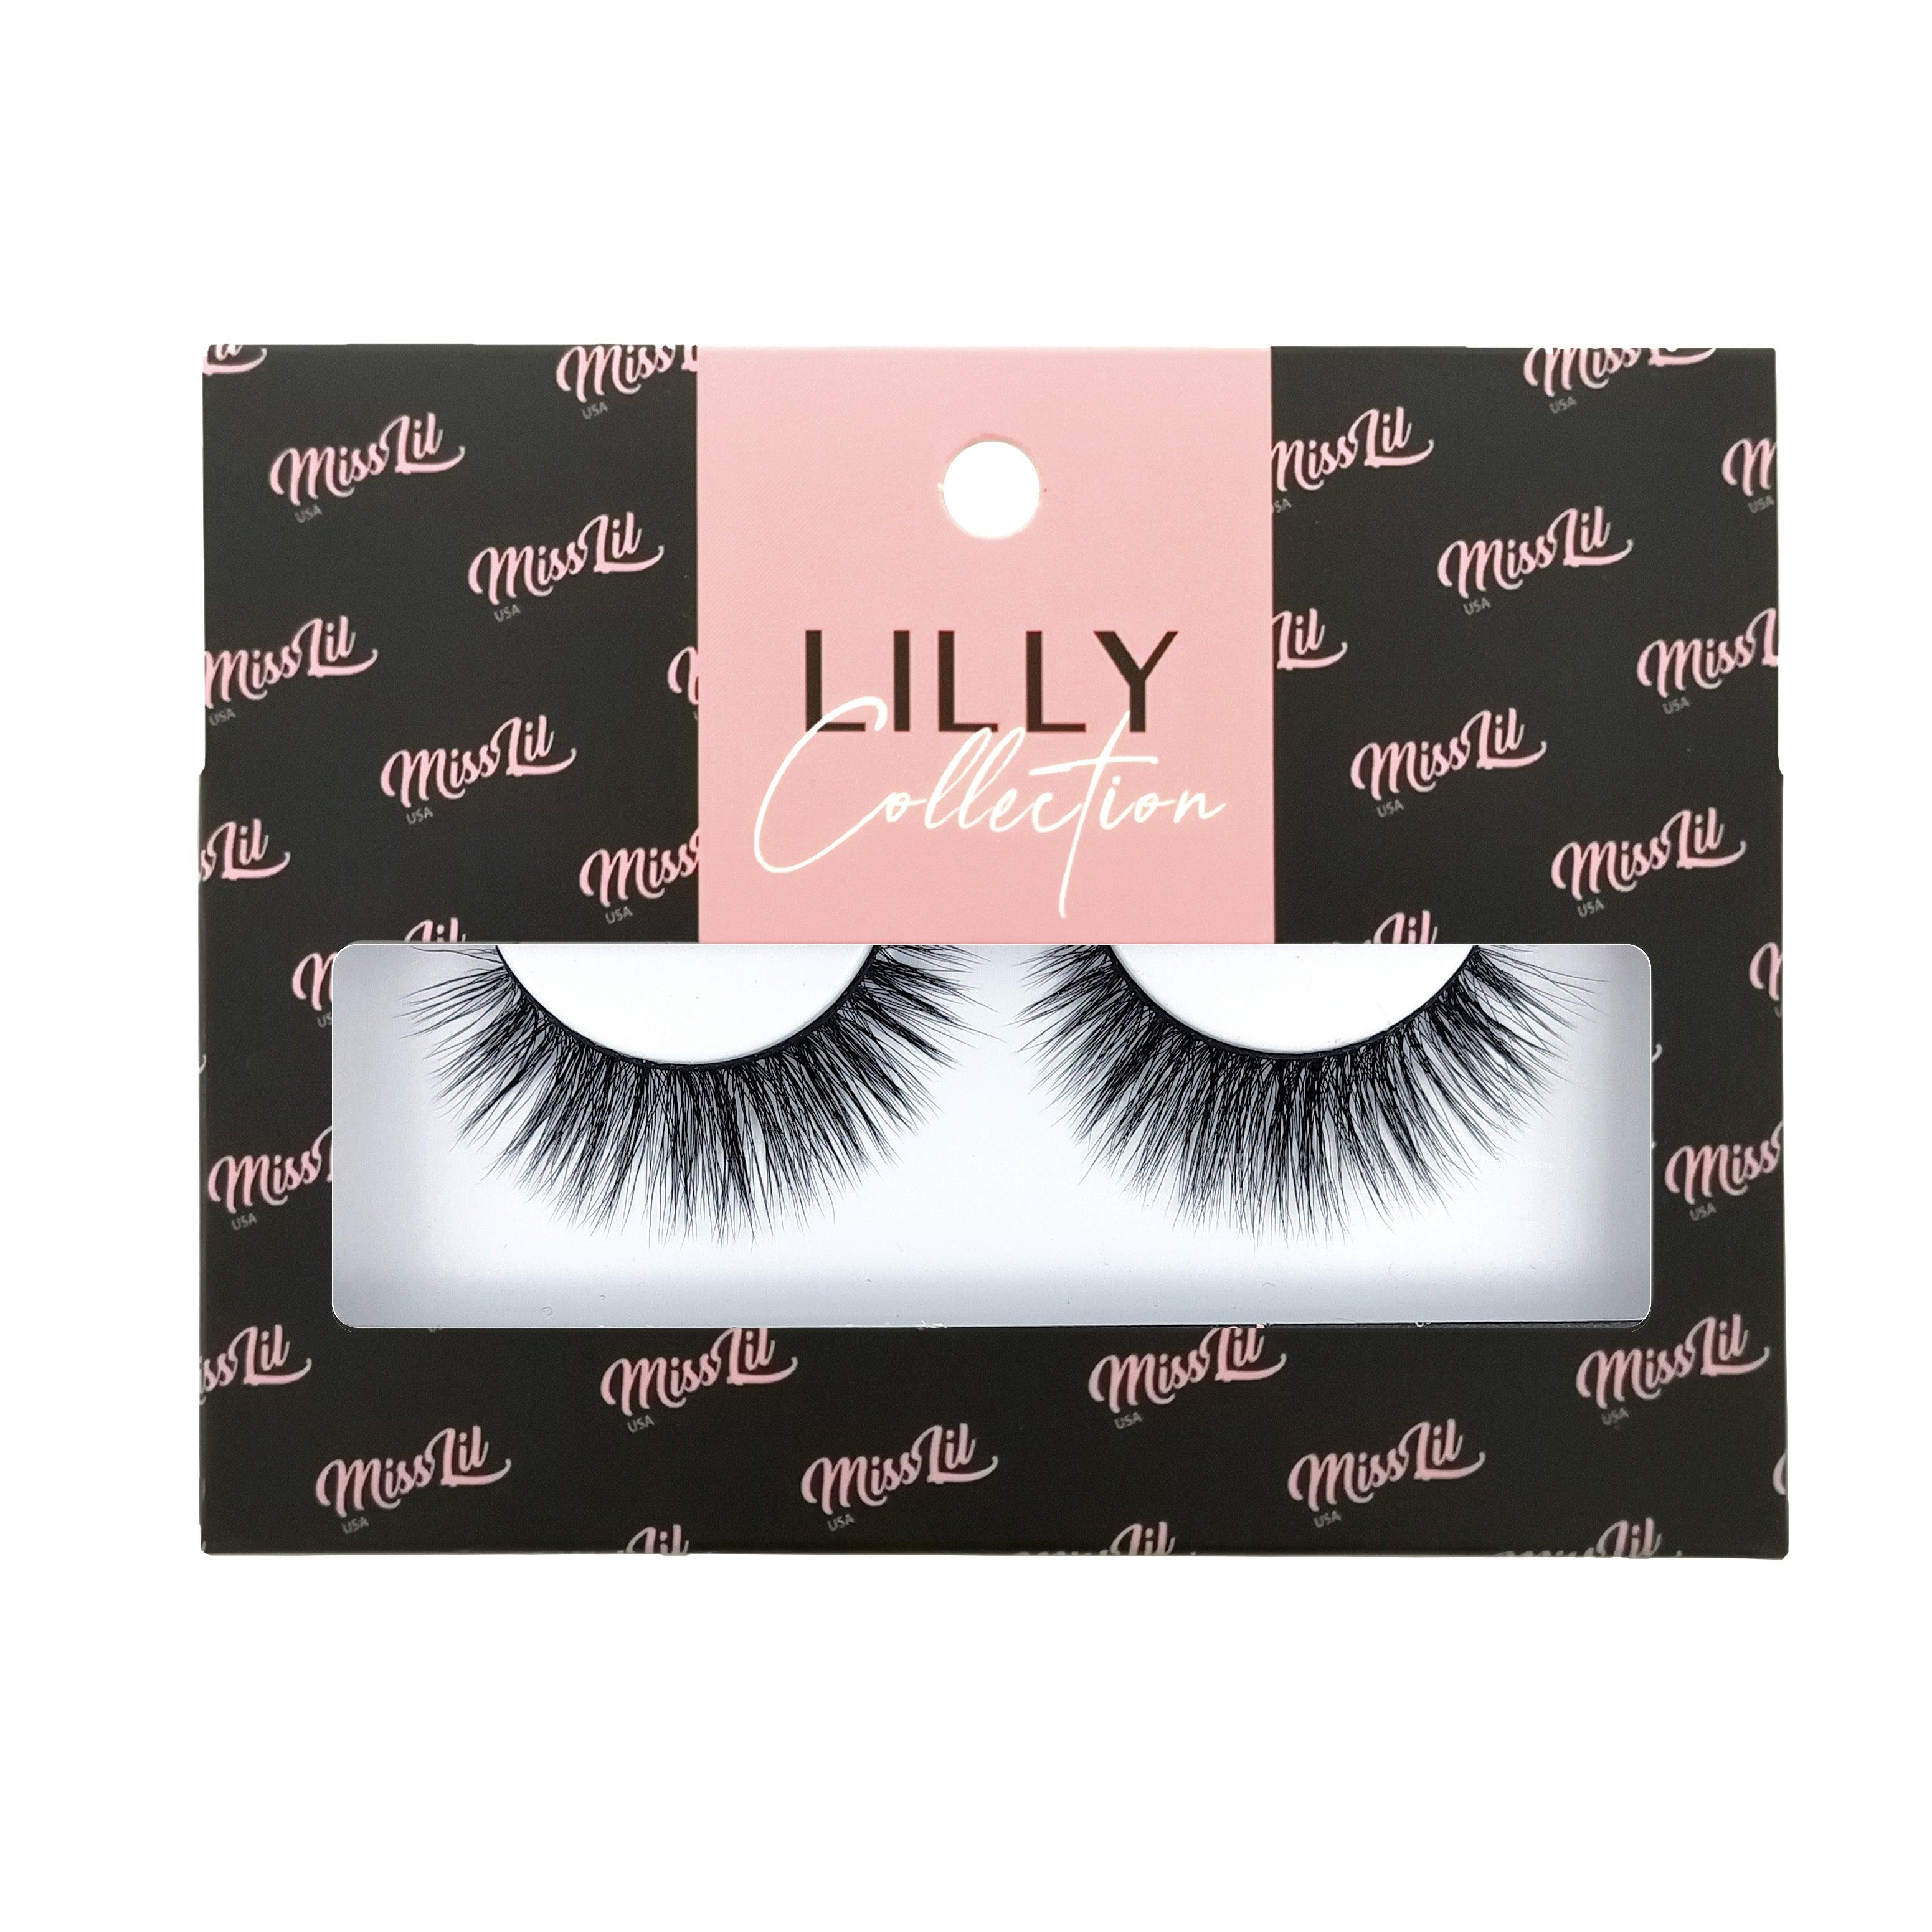 1-Pair Lashes-Lilly Collection #40 (Pack of 12) - Miss Lil USA Wholesale